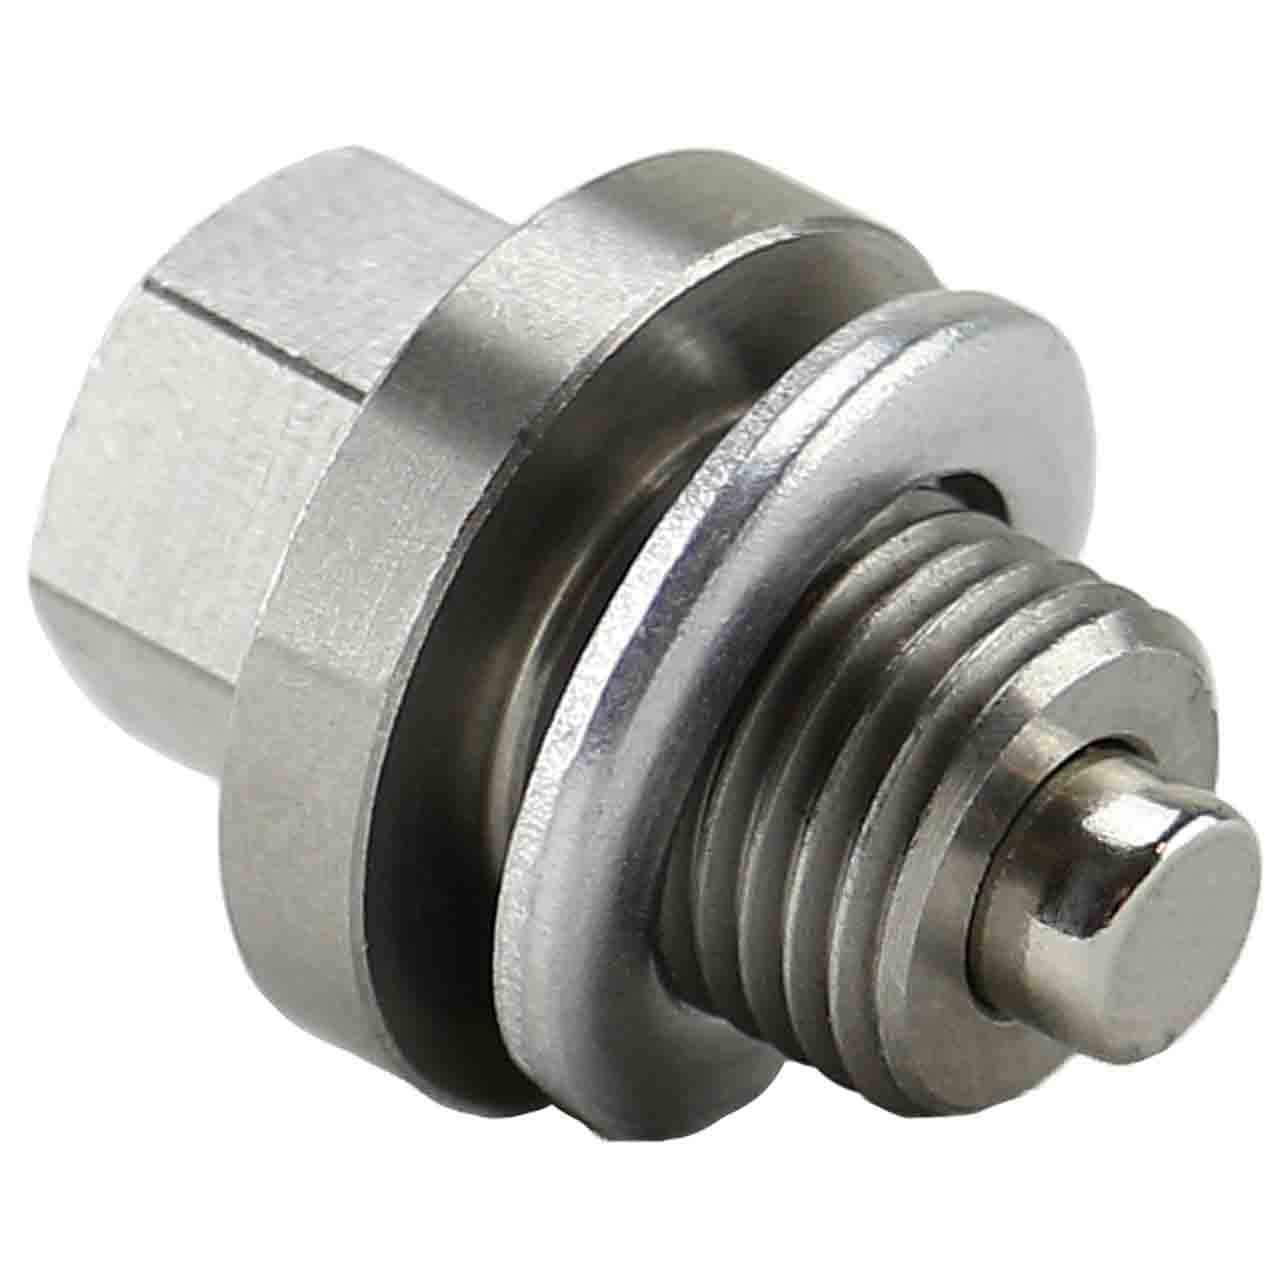 24-11-7-570-791 for Mini - Stainless Steel Magnetic Oil Drain Plug with Neodymium Magnet - Made In USA